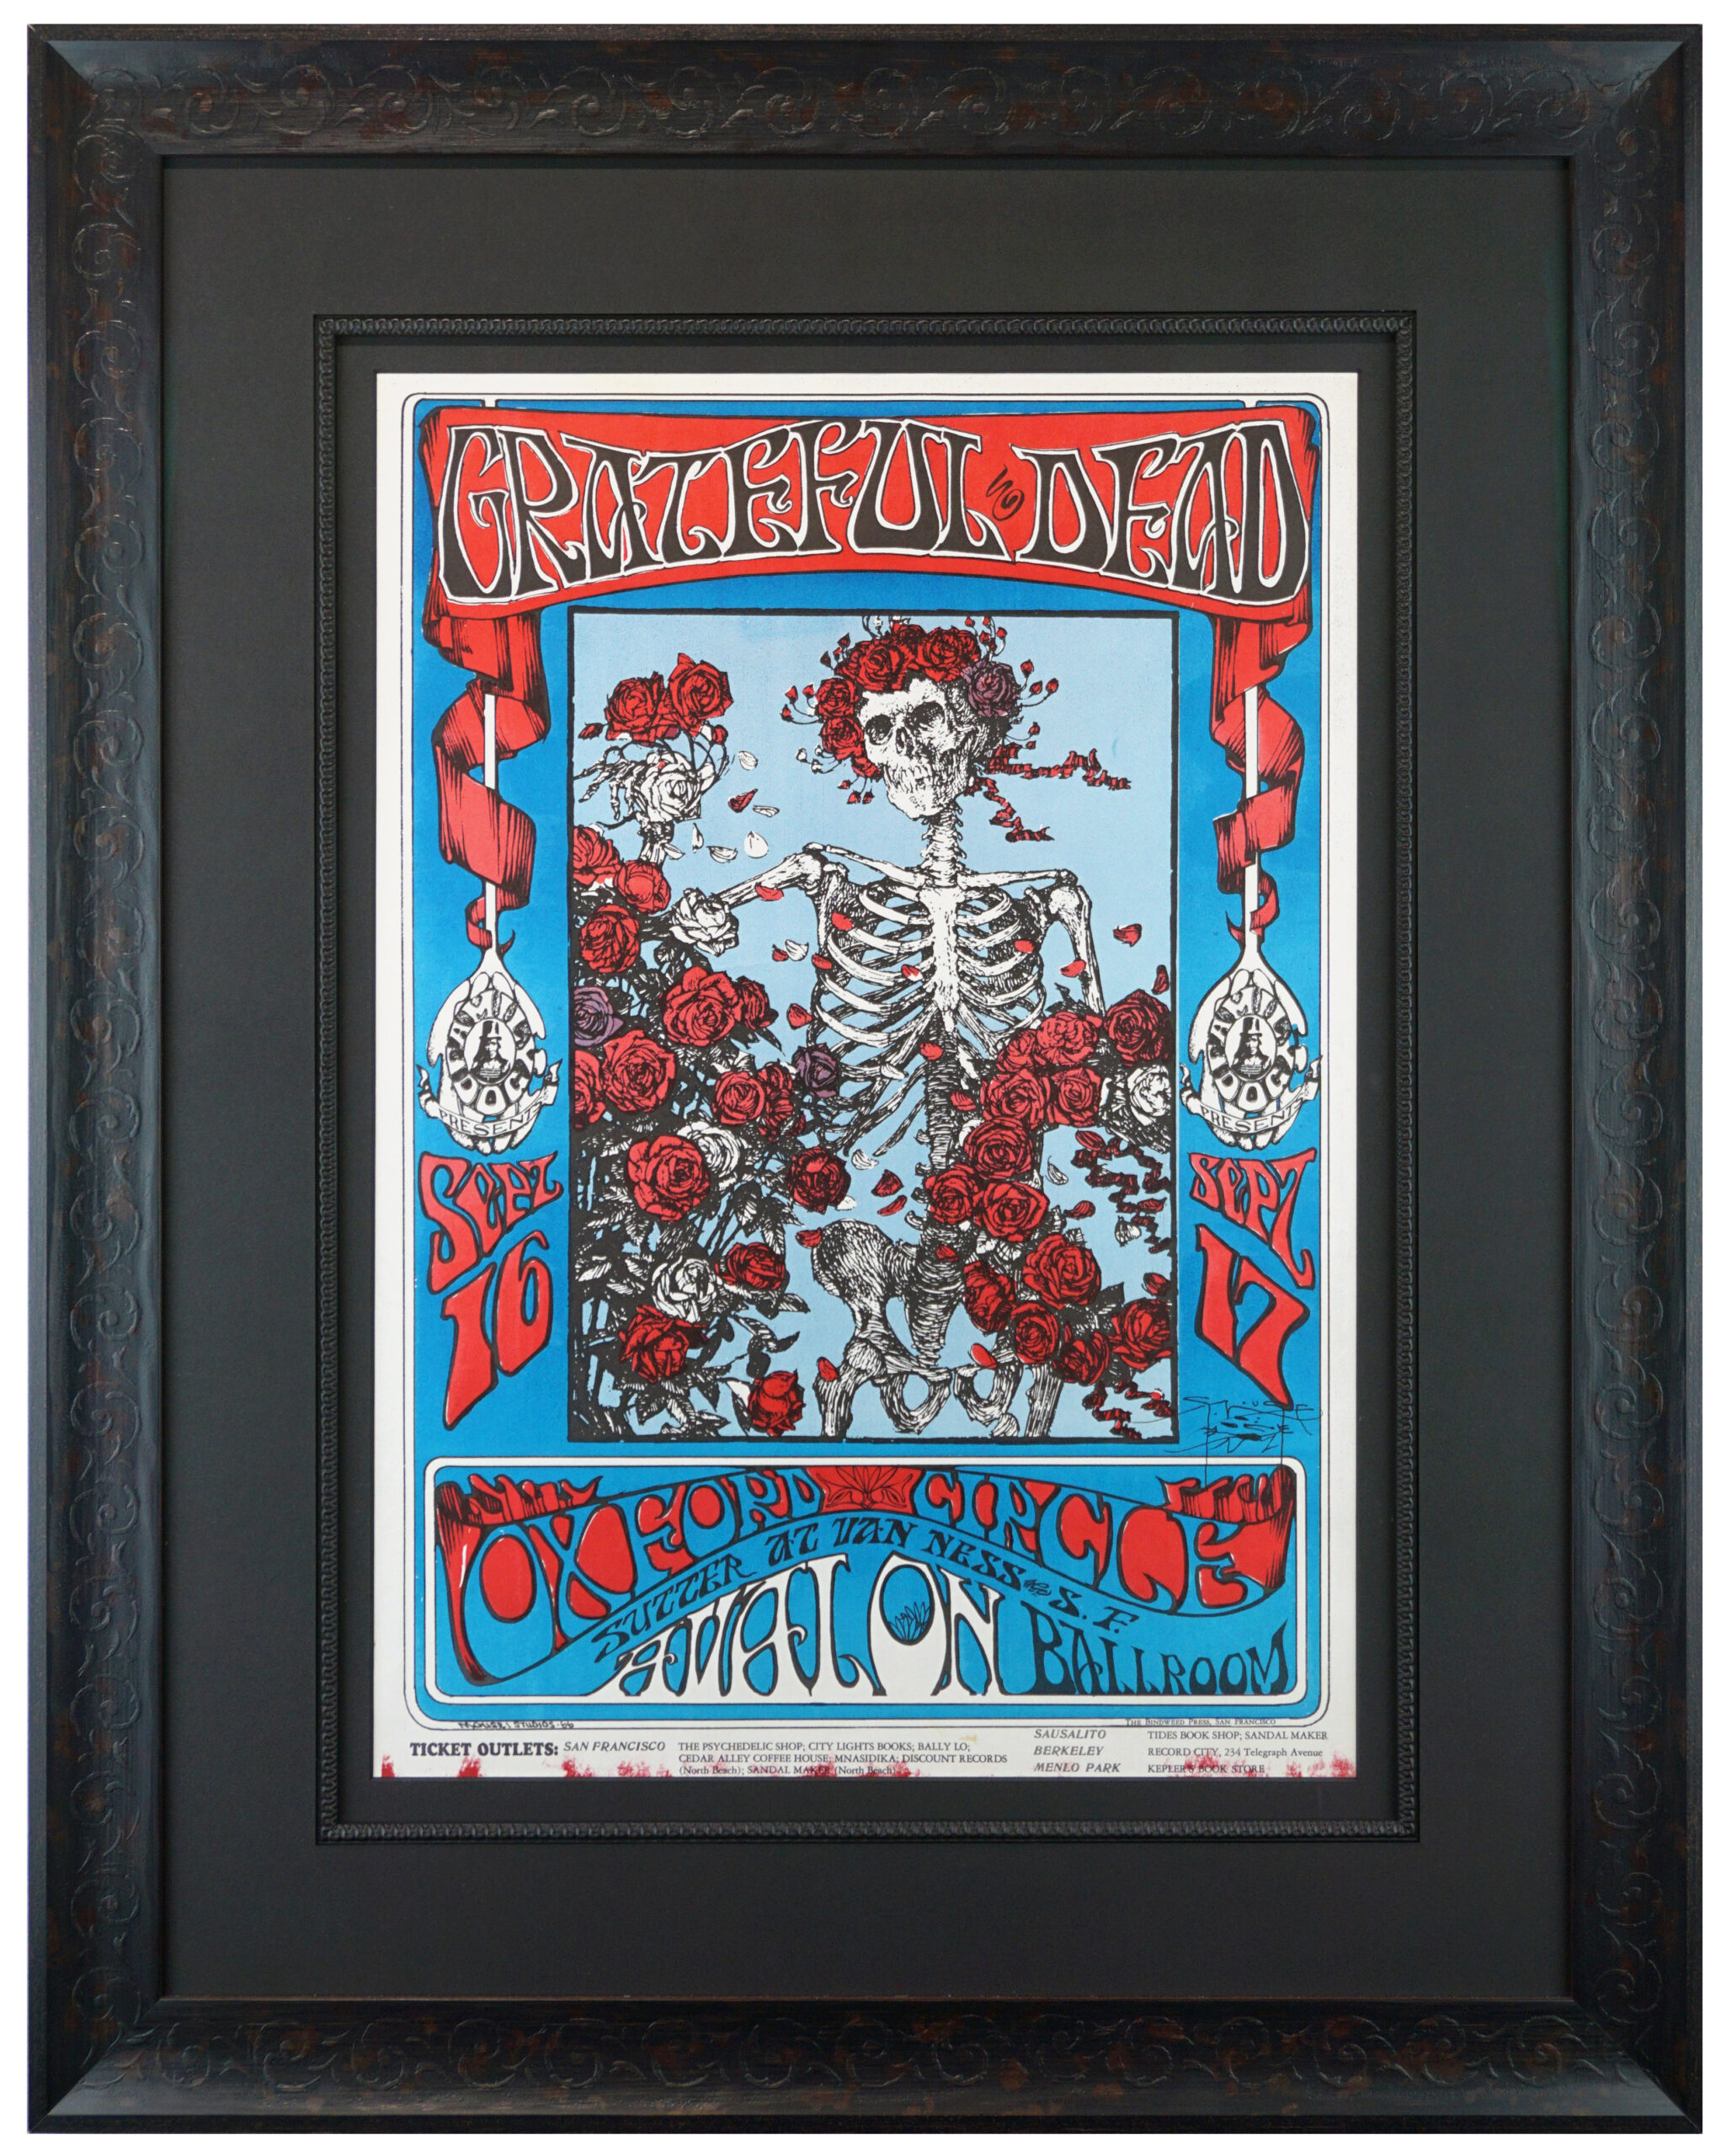 https://www.narrowscenter.org/wp-content/uploads/2022/08/1.-22Skeleton-Roses22-1996-Macine-lithograph-first-printing-by-Stanley-Mouse-Alton-Kelley-scaled.jpeg